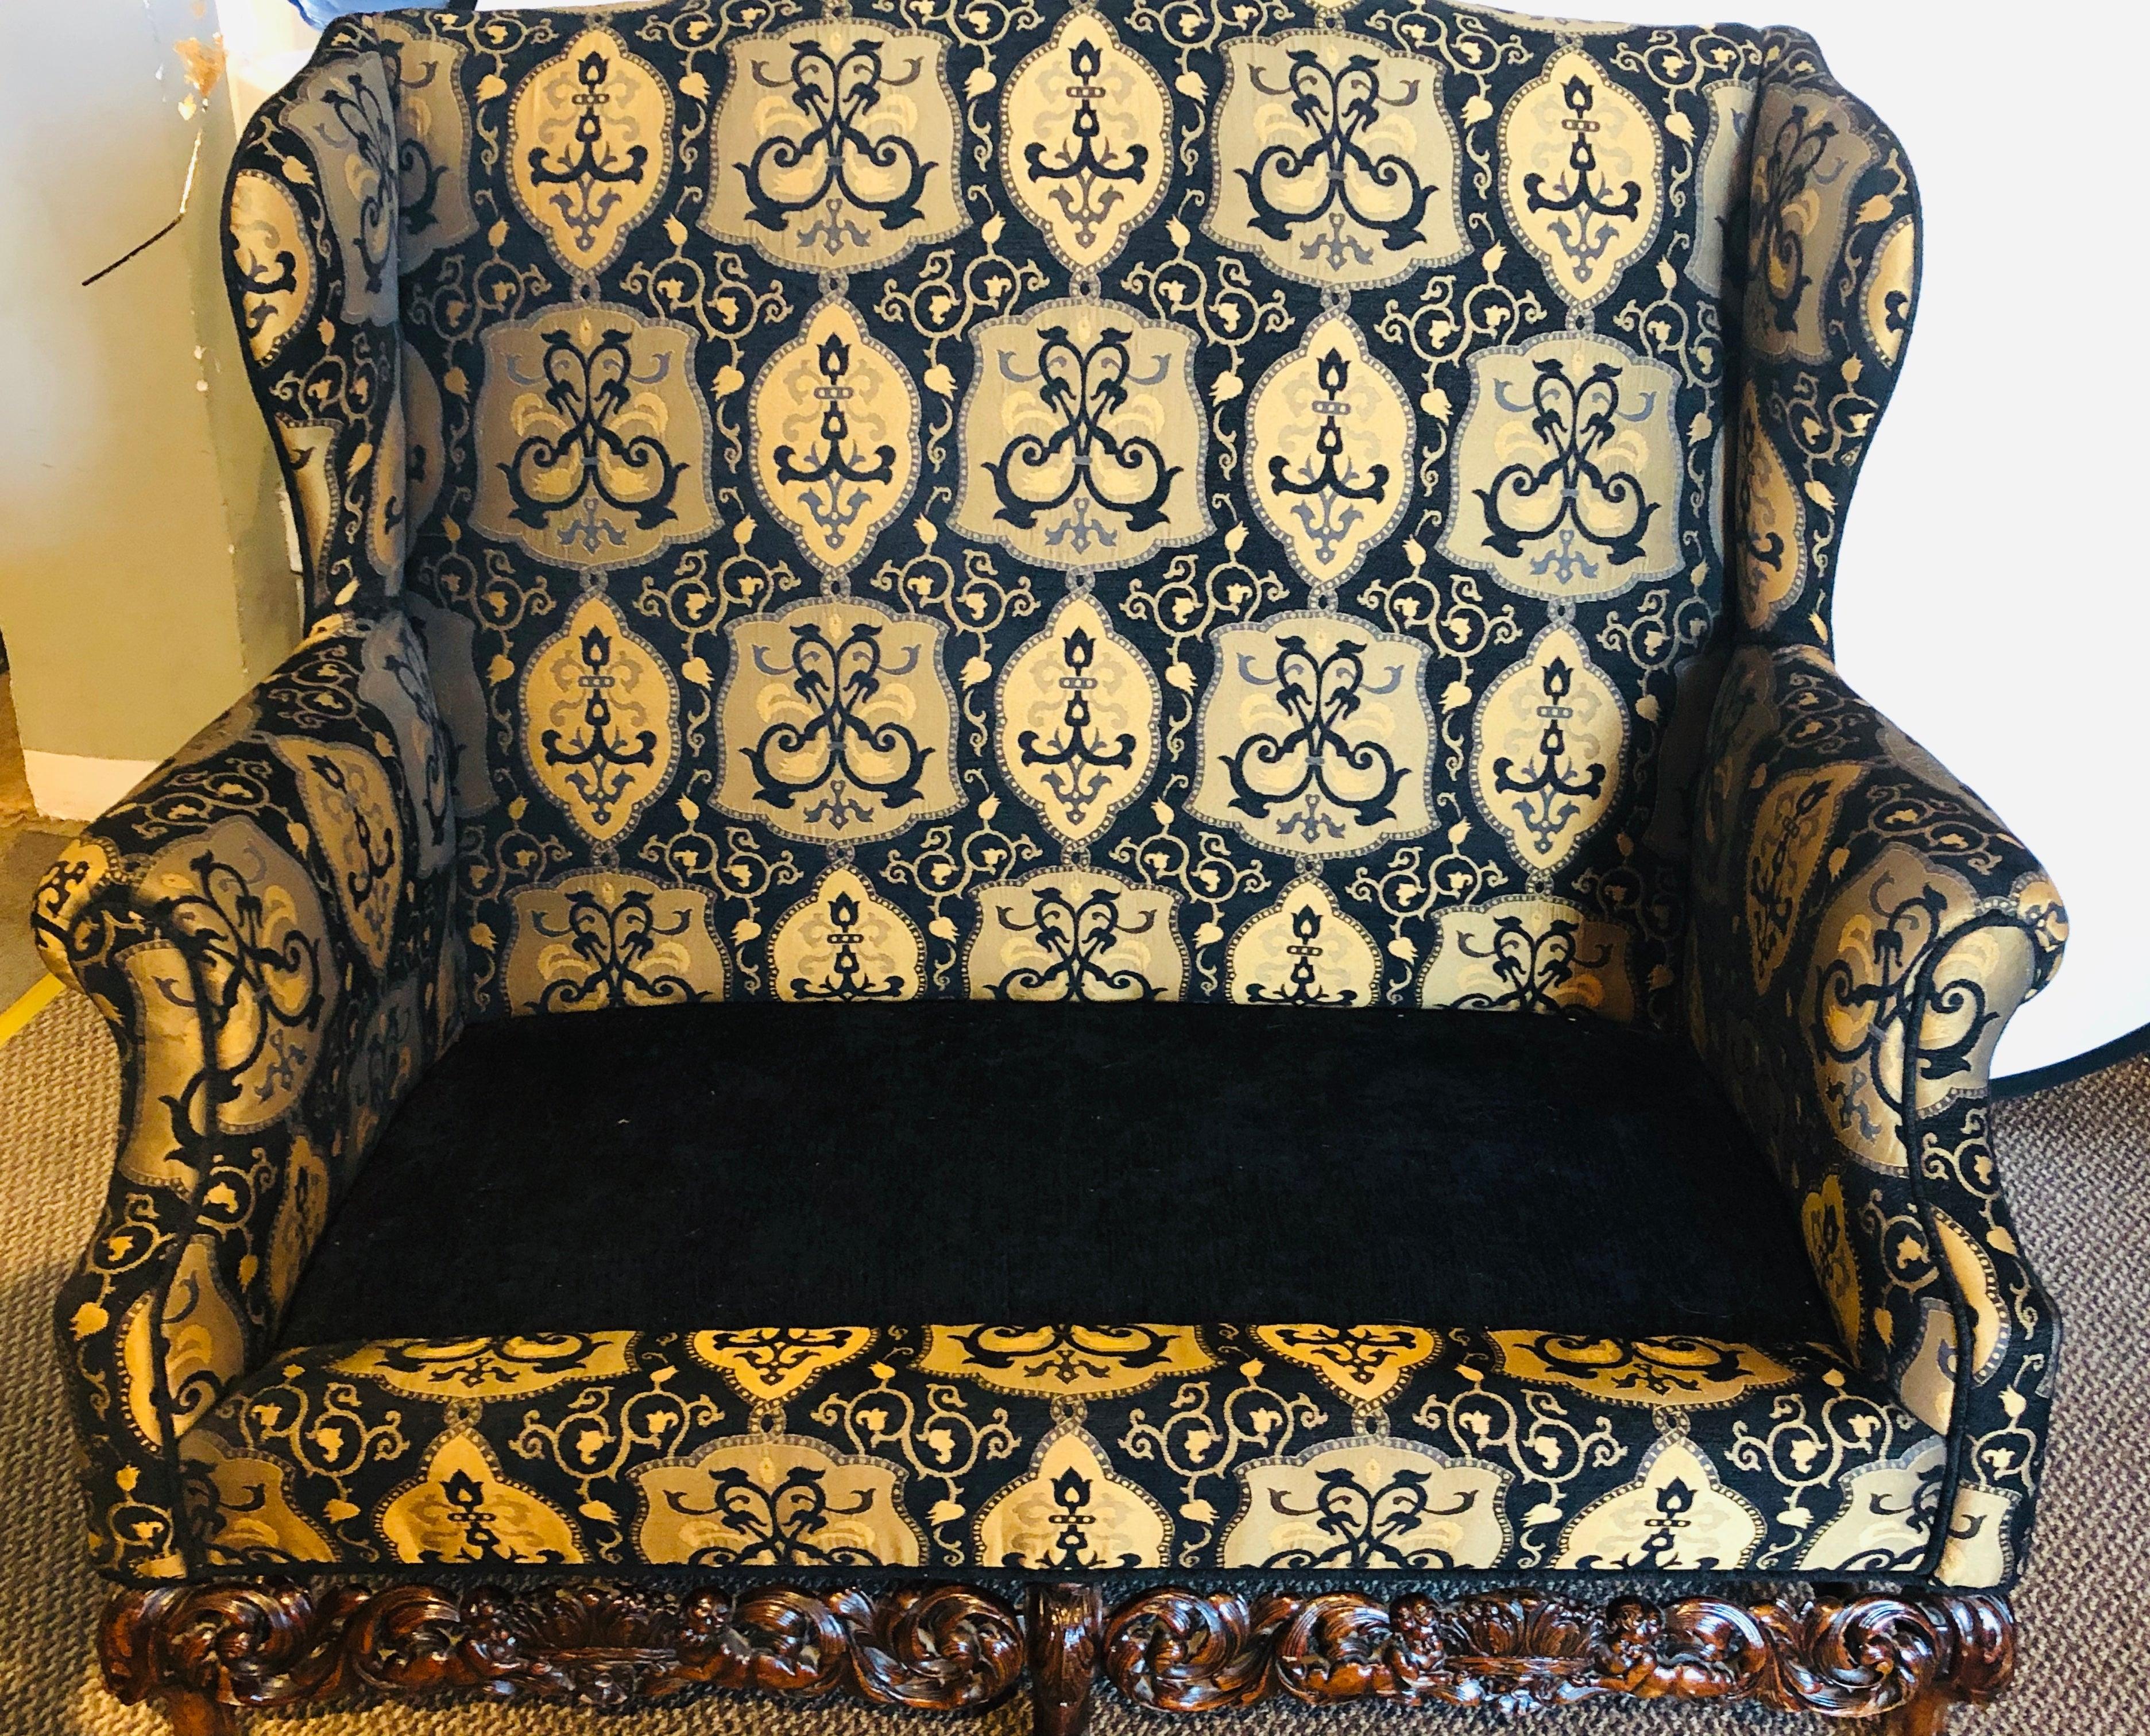 Italian Rococo Revival Style Settee or Sofa, Black and Beige Upholstery, a Pair For Sale 2